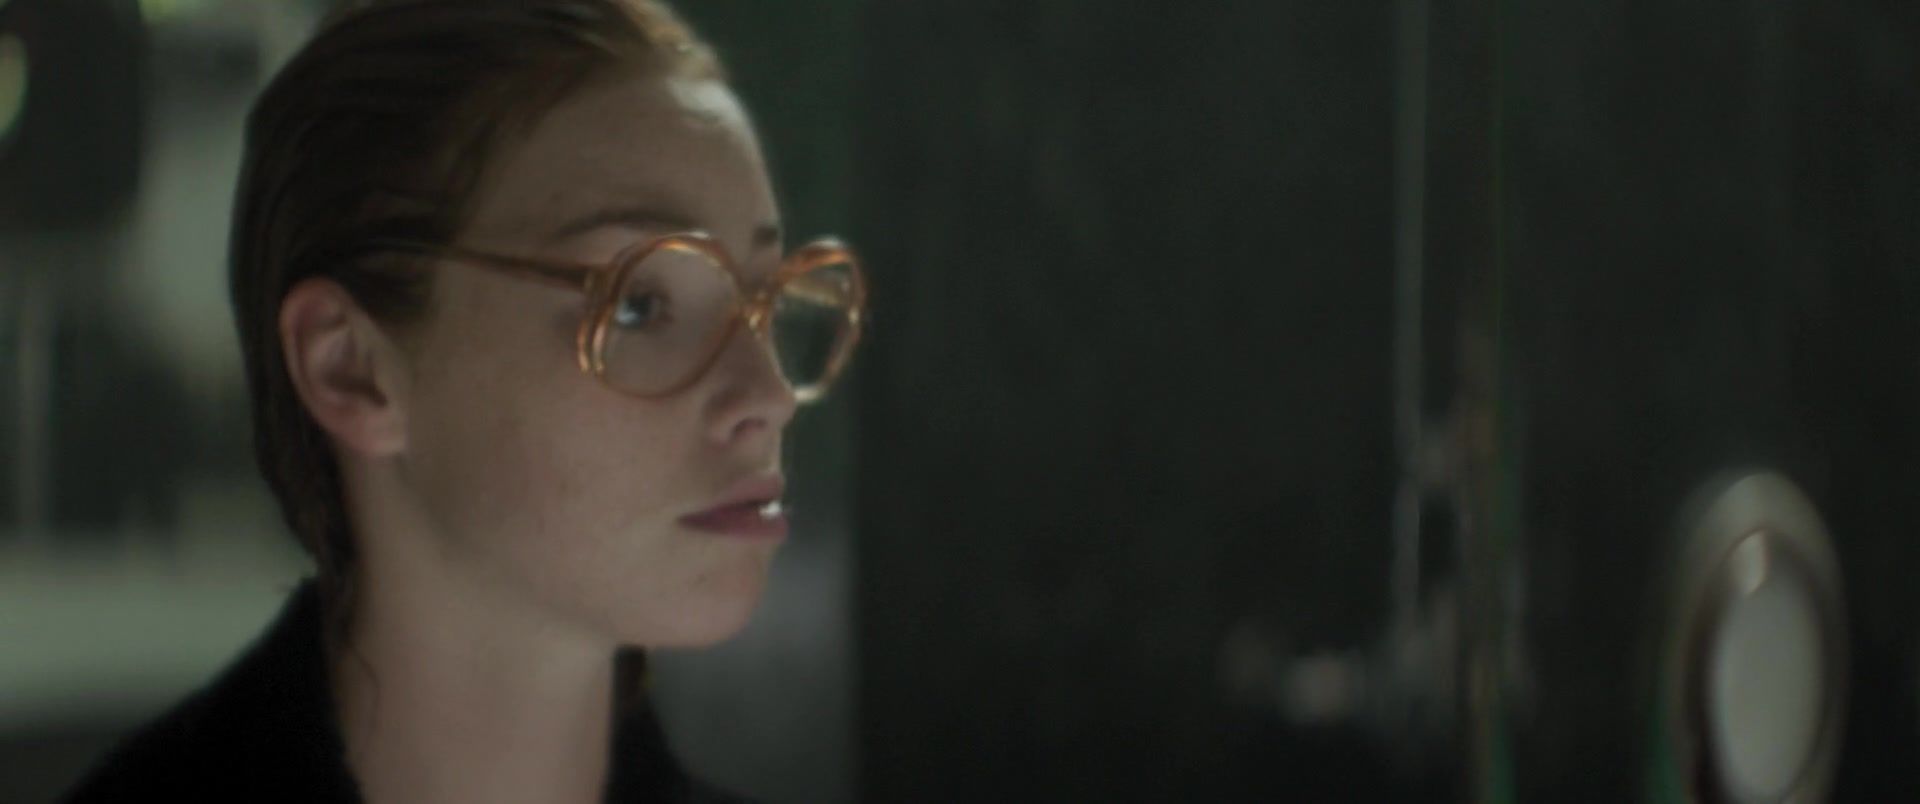 YesPornPlease Freya Mavor - The Lady in the Car with Glasses and a Gun (2015) Joanna Angel - 2